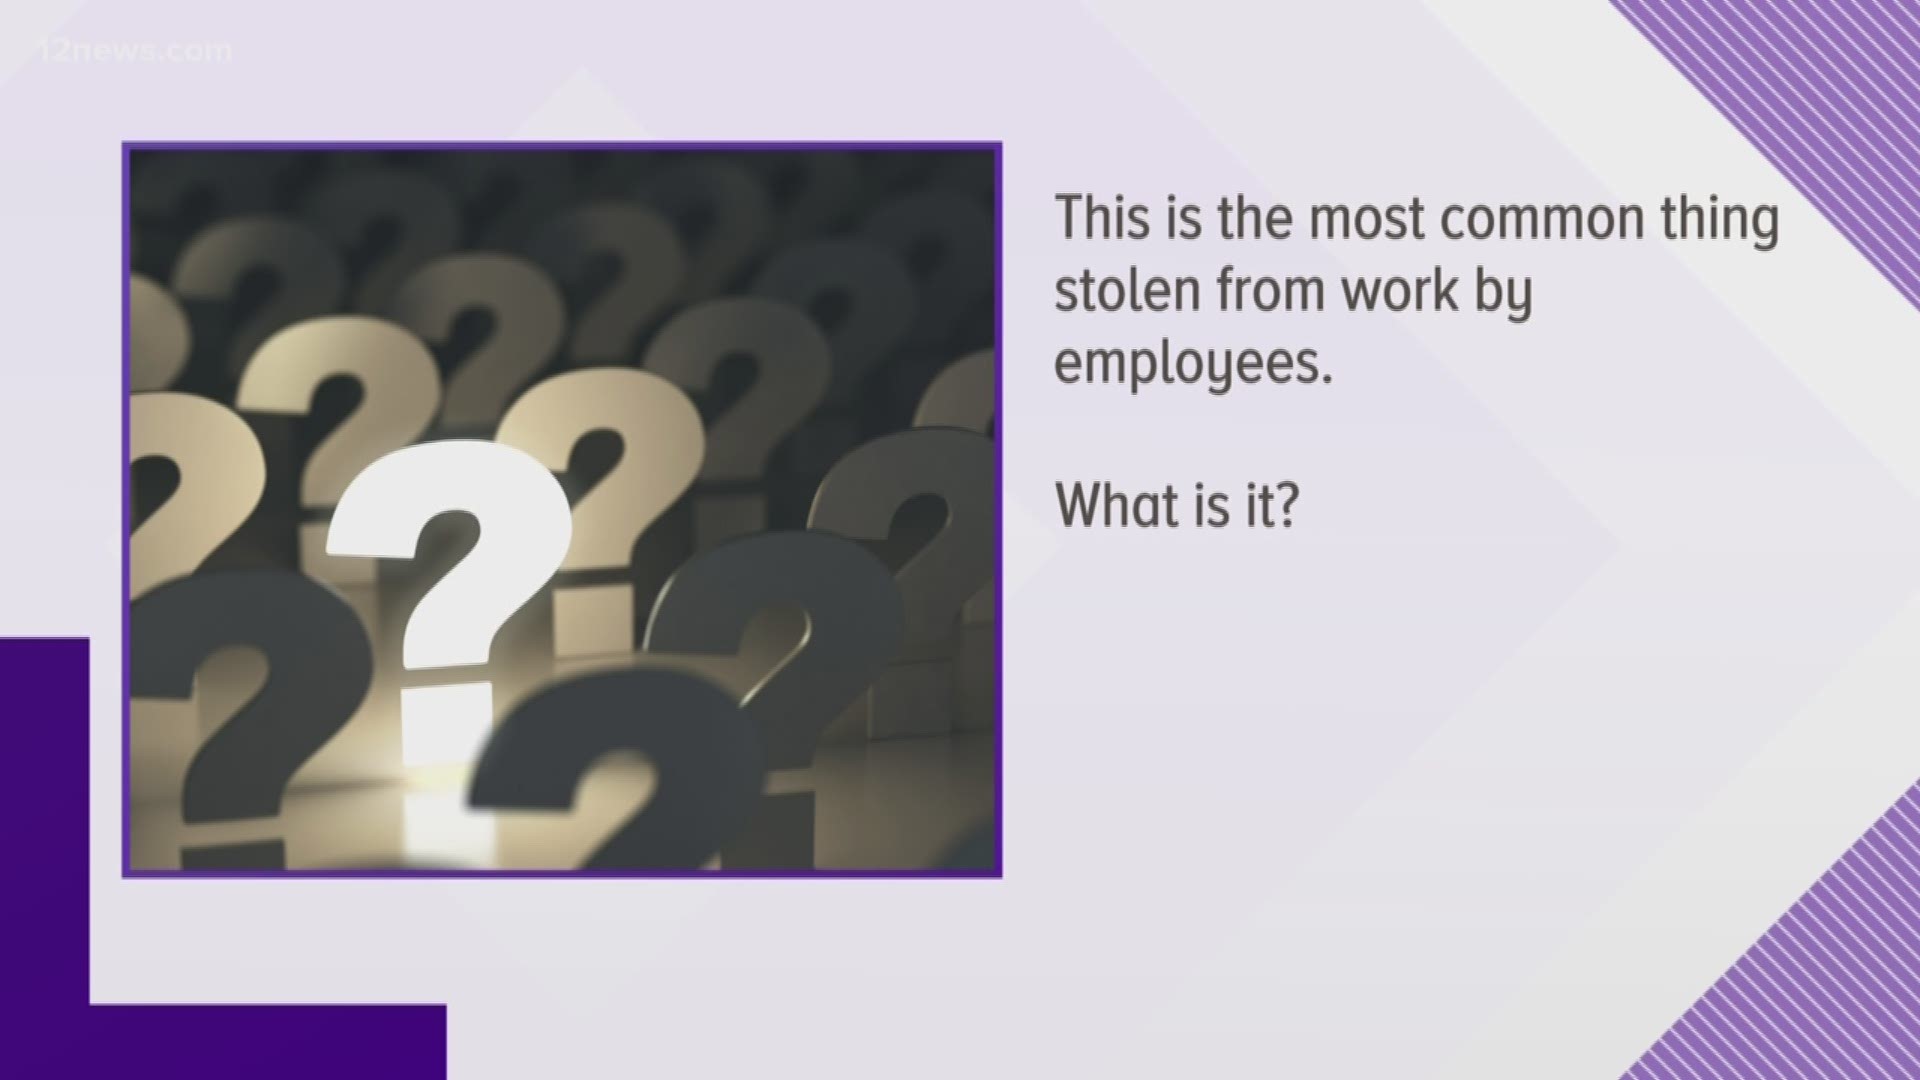 THIS is the most common thing stolen from work by employees. What is it?